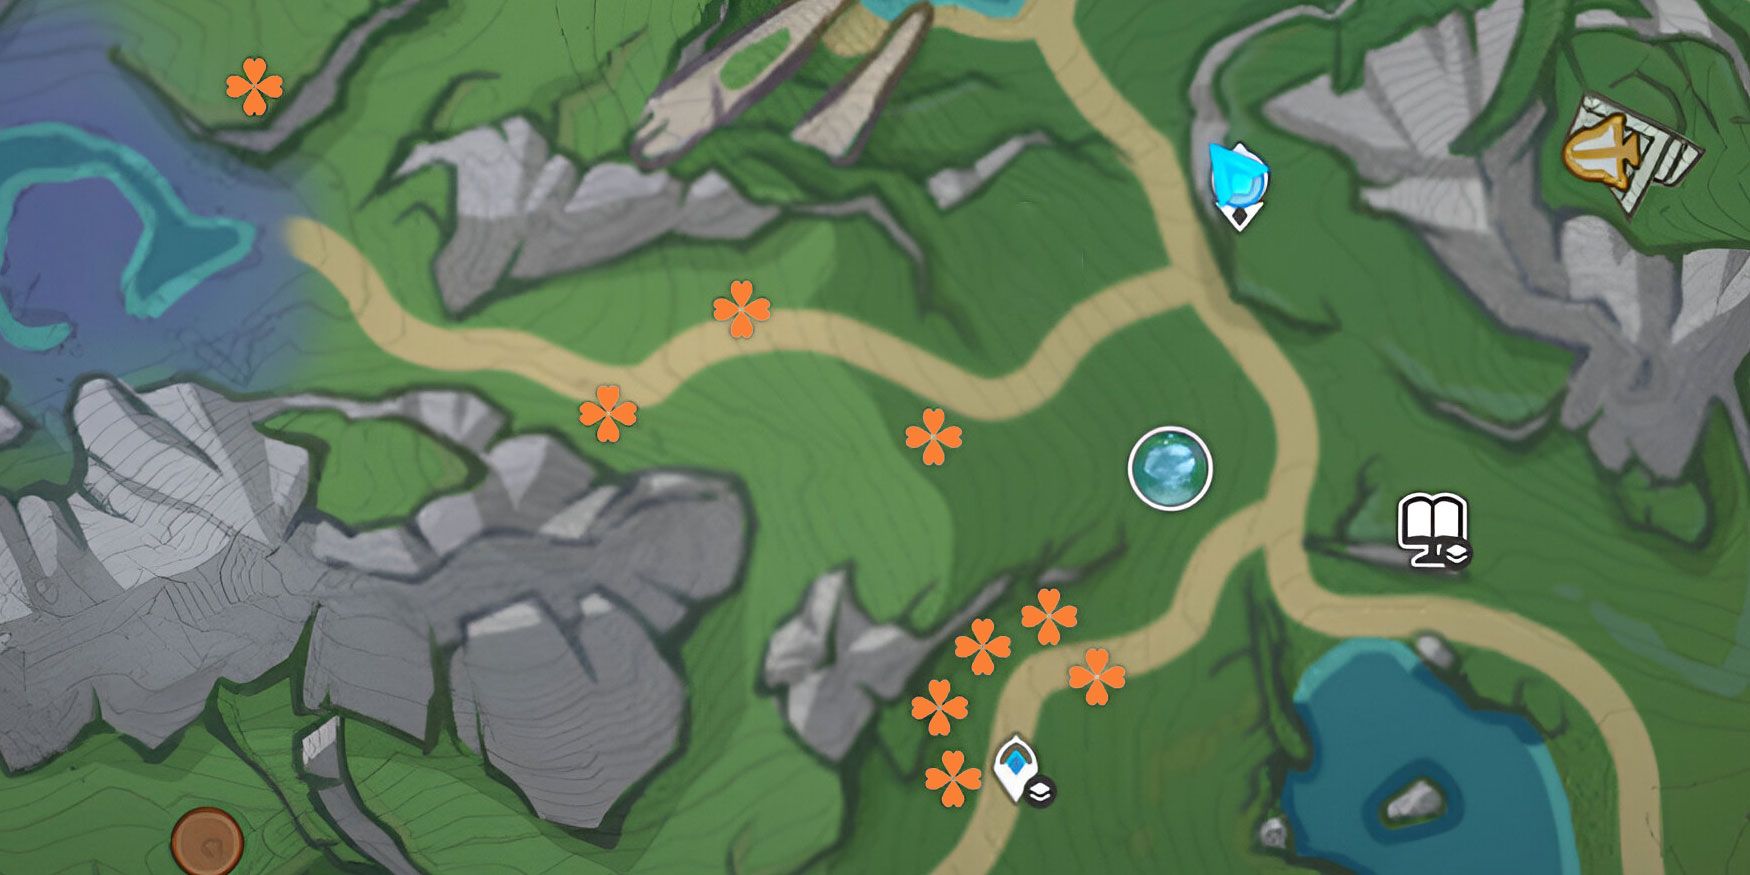 A map of the location of some Rainbow Roses found in Elynas in the Beryl Region, an area of the Fontaine map in Genshin Impact.